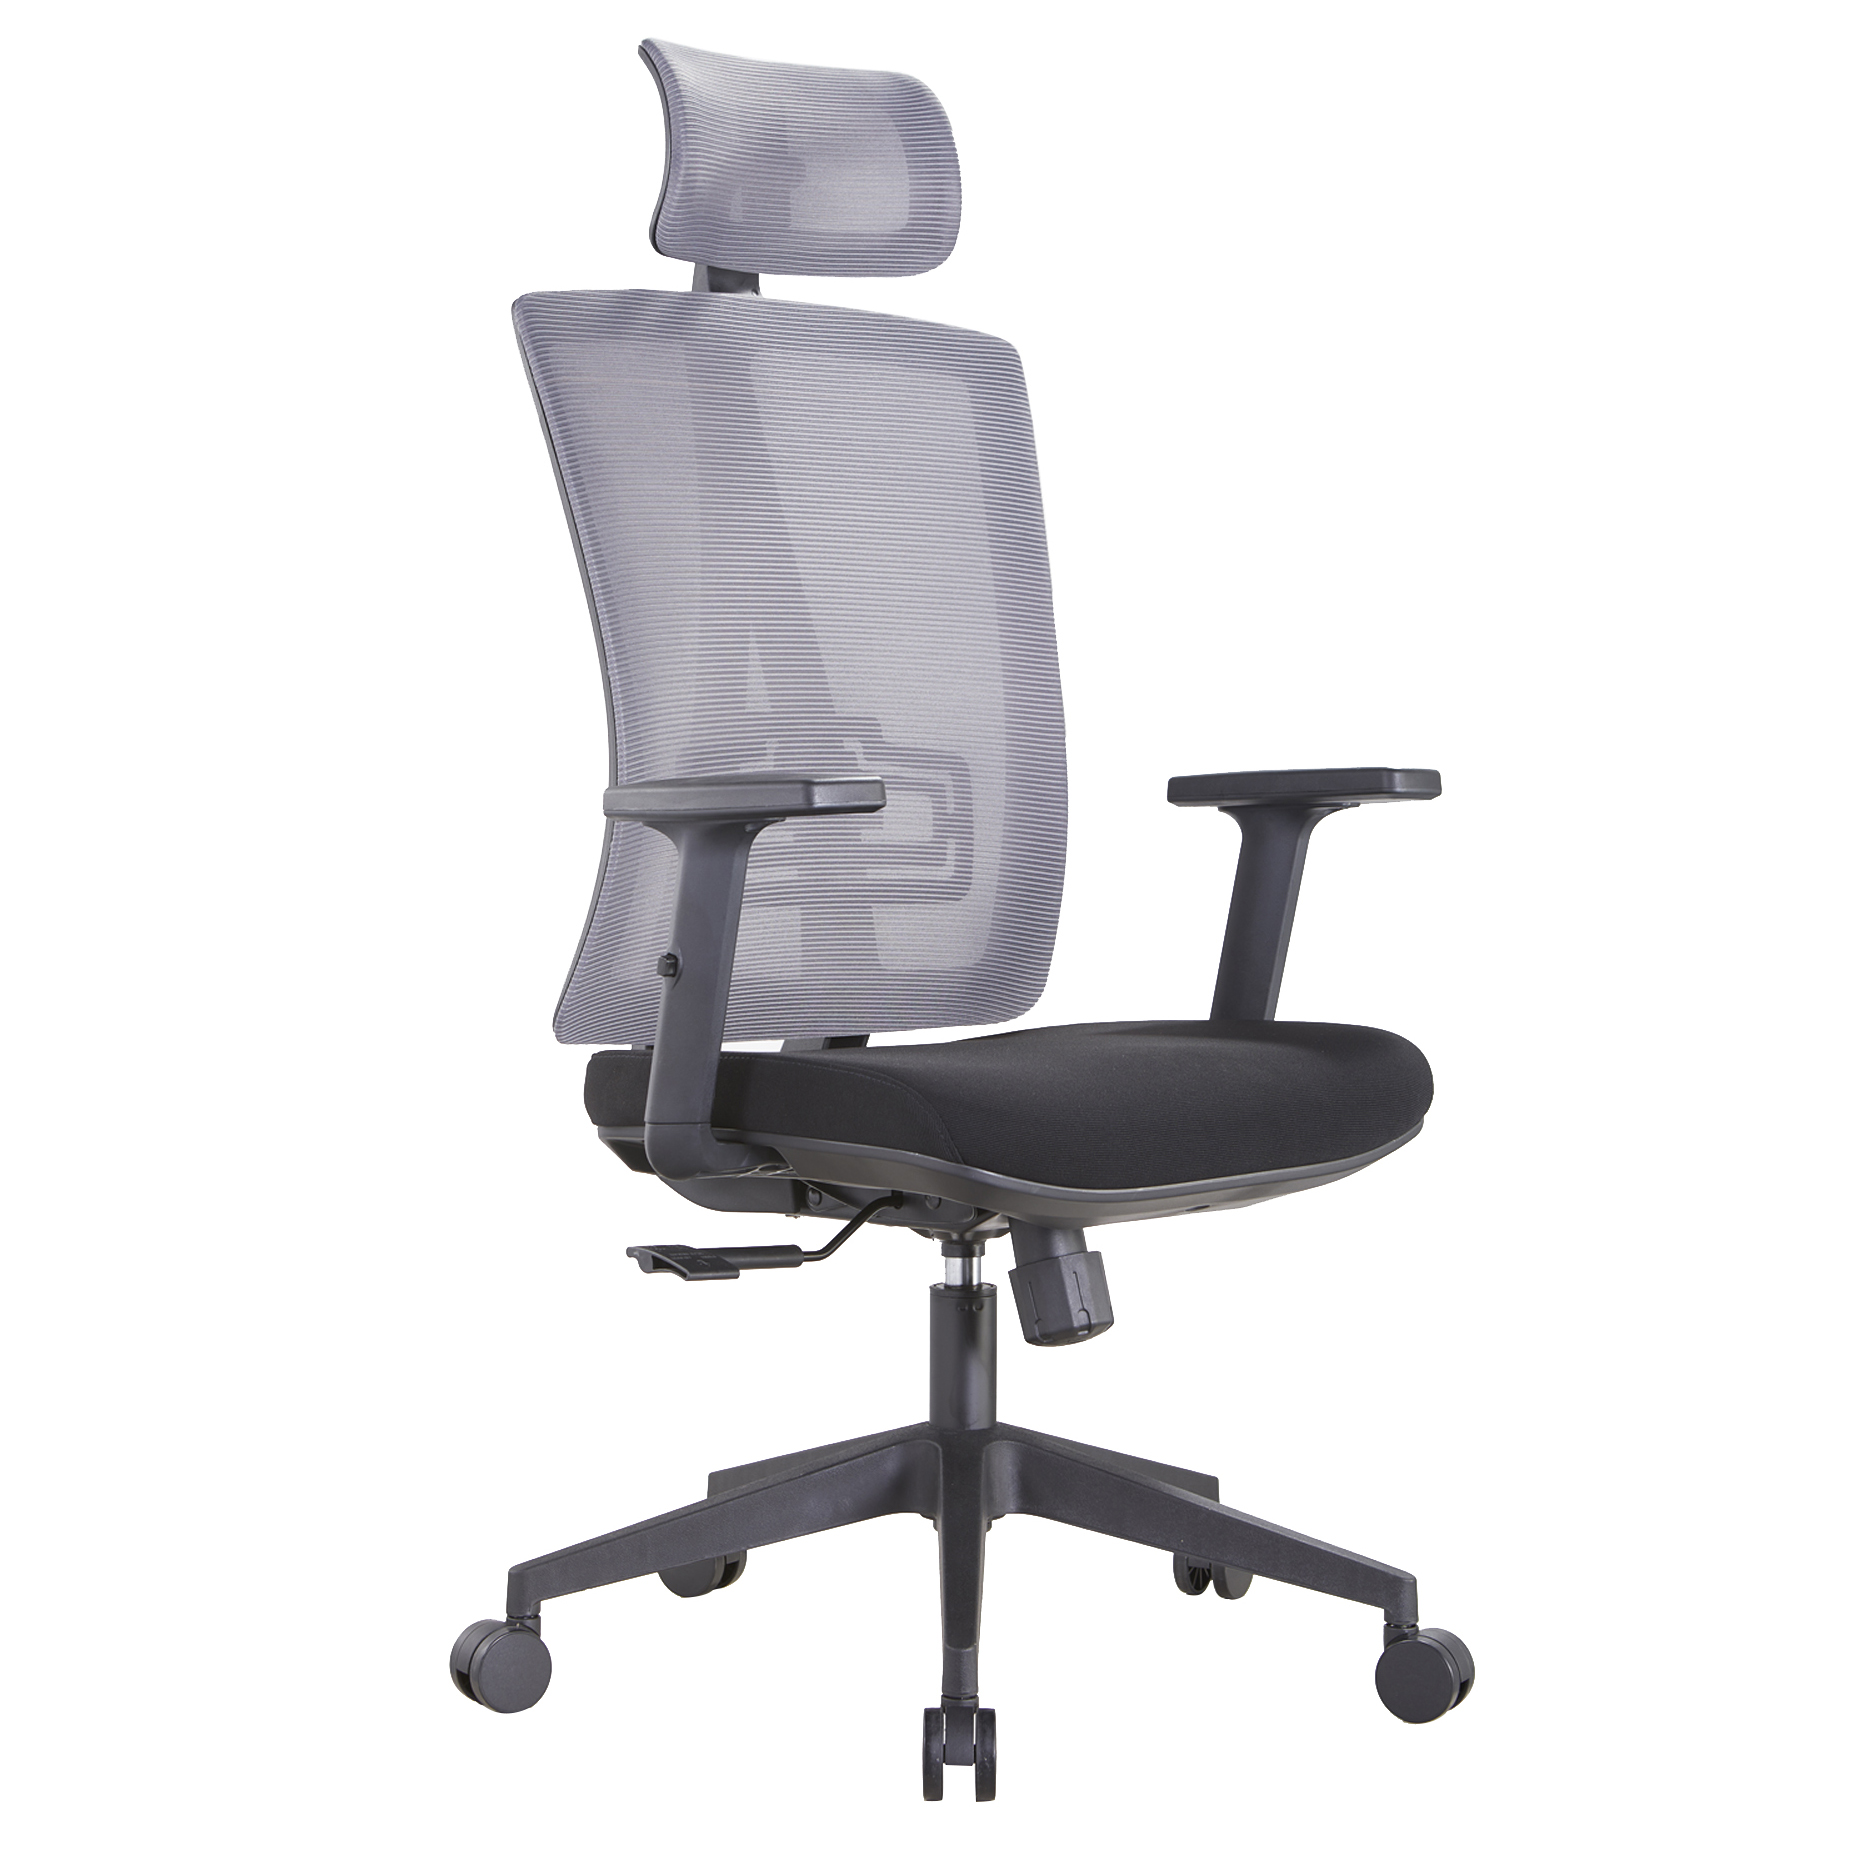 Model: 5016 High back ergonomic mesh office chair with 3D adjustable armrest Featured Image